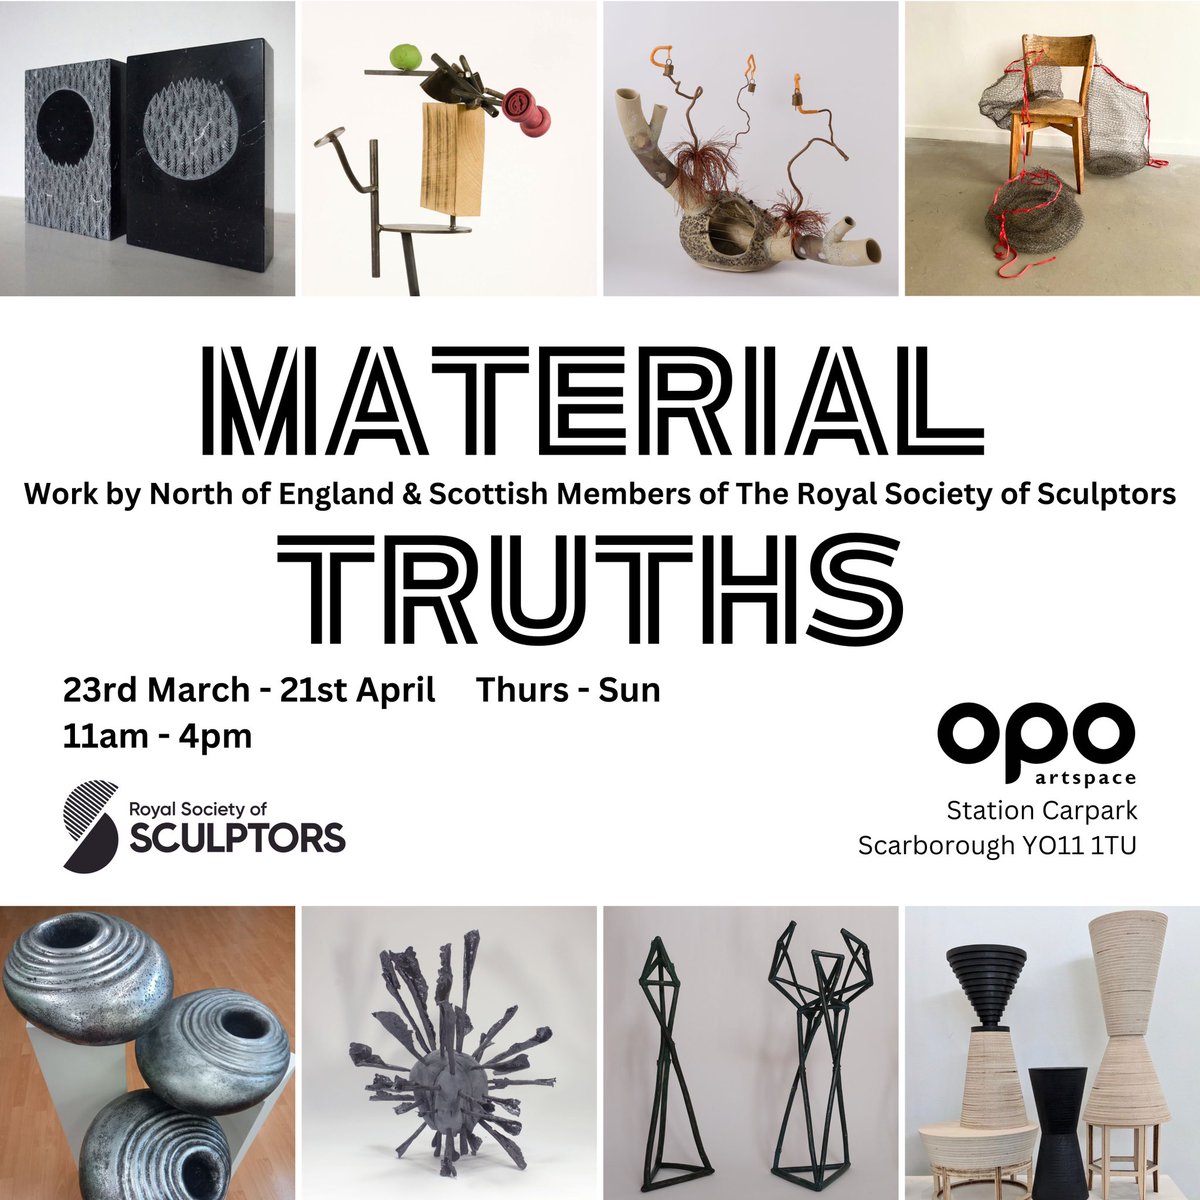 Save the Date - Saturday 23rd March 2-4pm Join the artists to celebrate the opening of Material Truths, an exciting show of contemporary sculpture by 22 North of England and Scottish members of the Royal Society of Sculptors. @Royal_Sculptors @YSPsculpture @HMILeeds